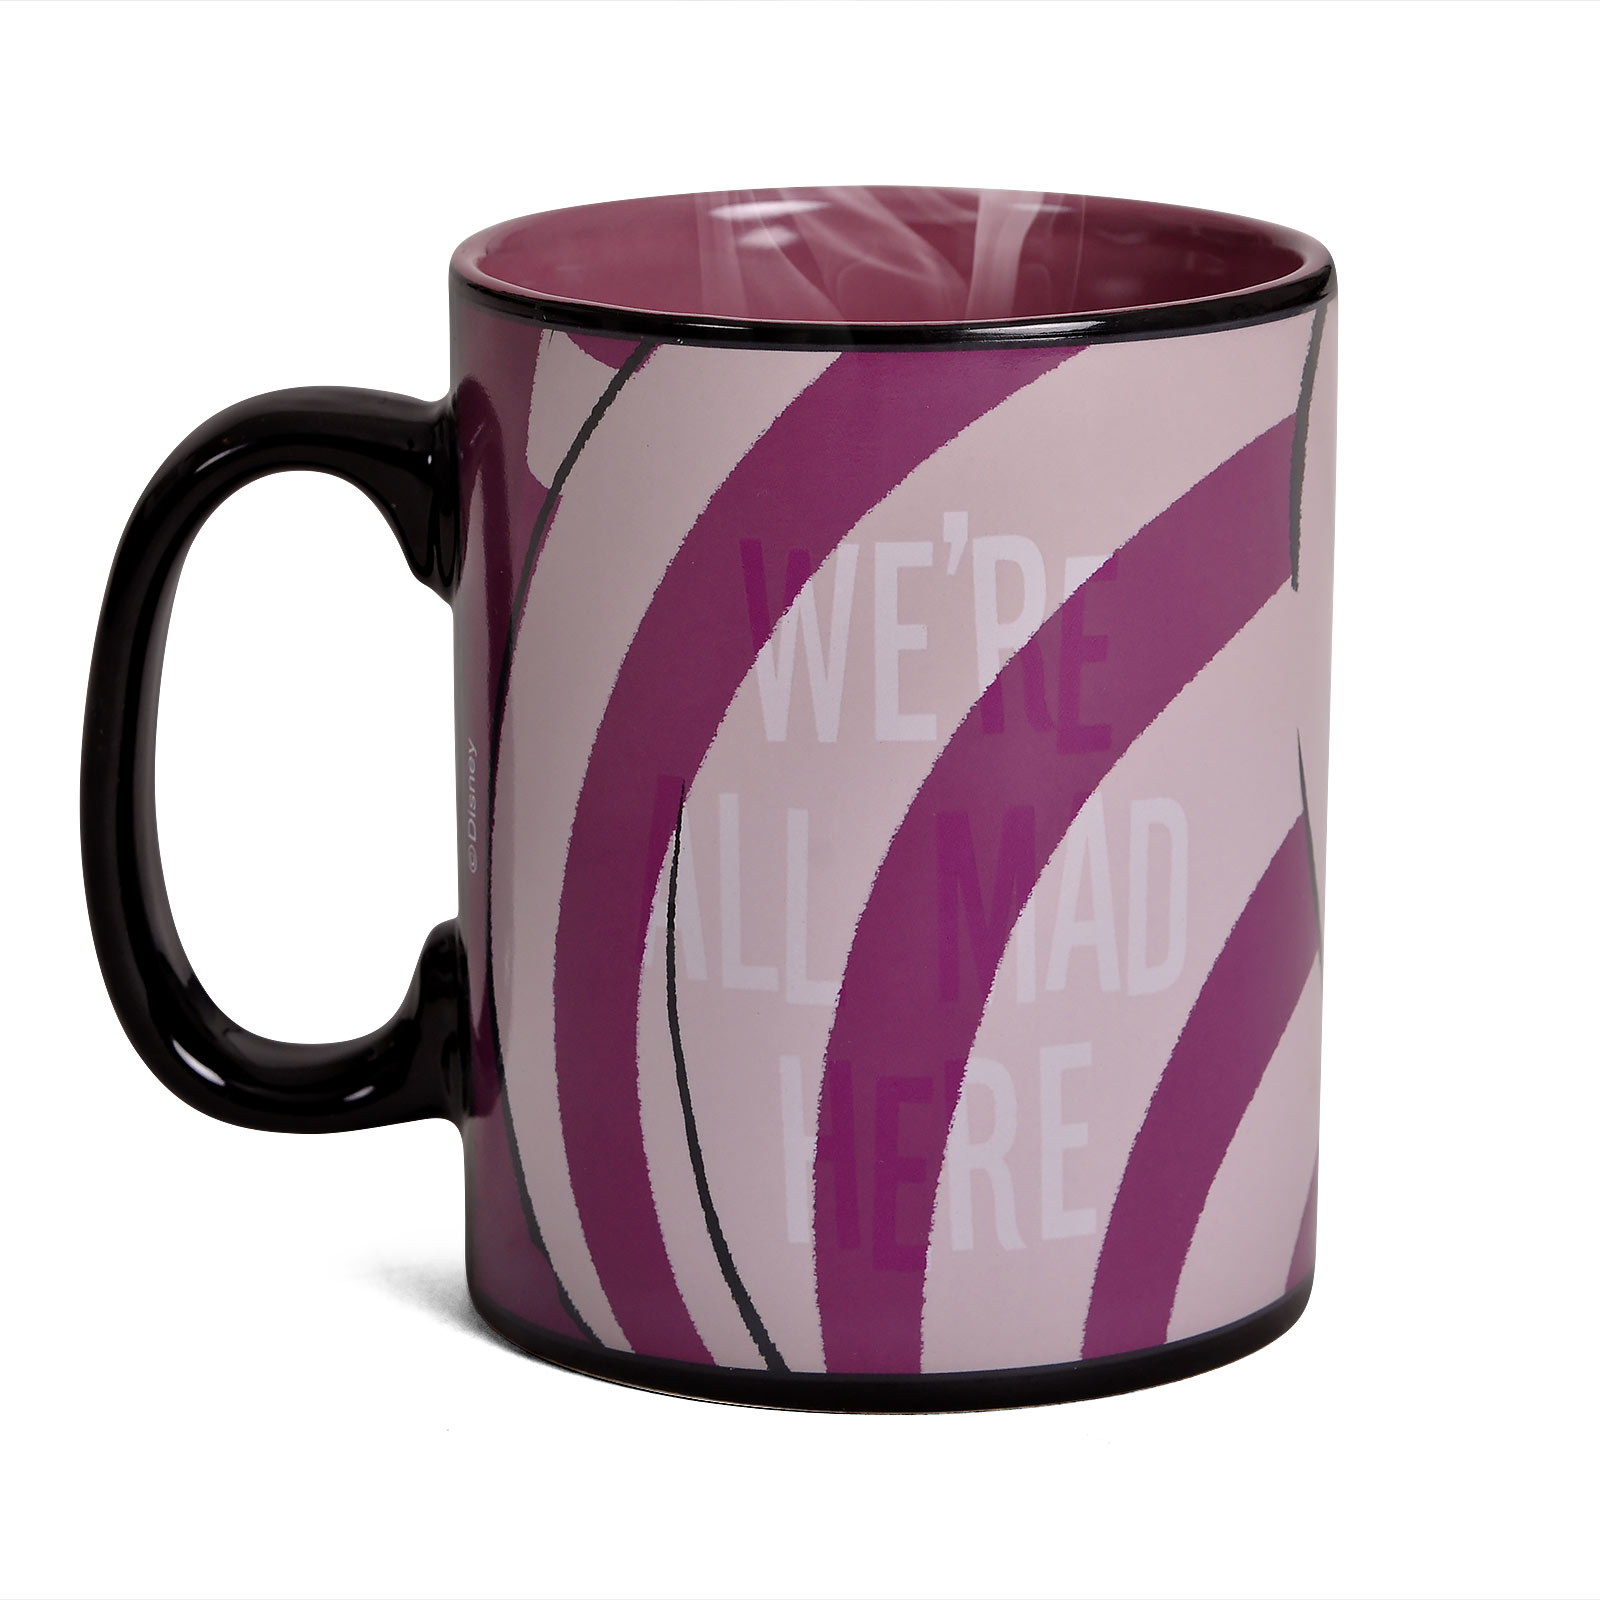 Alice in Wonderland - Cheshire Cat Thermoeffect Cup